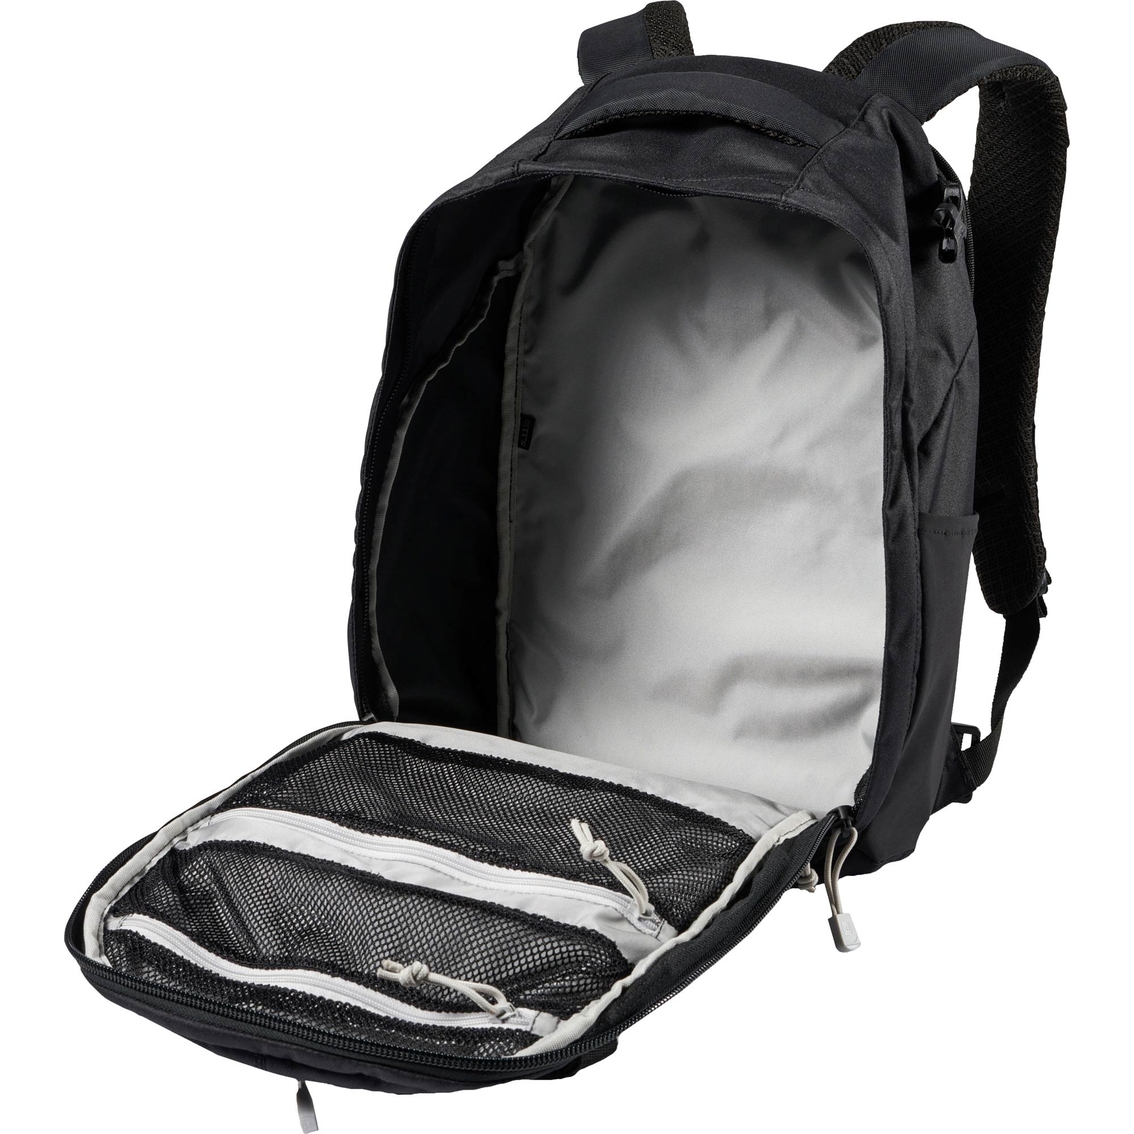 5.11 COVERT 18 2.0 Backpack - Image 7 of 10